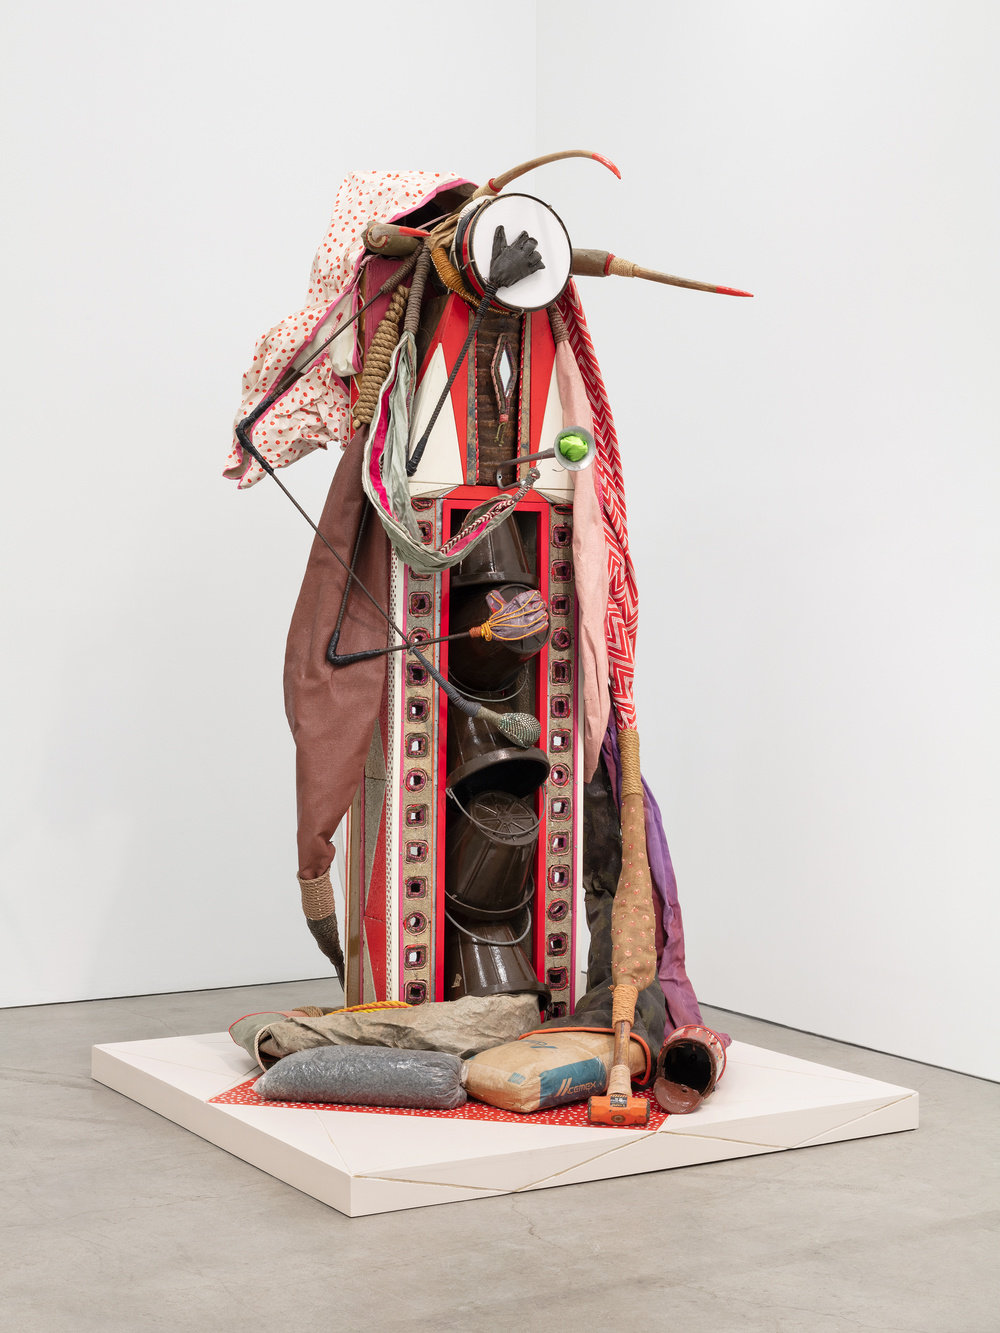 A mixed media sculpture by Daniel Lind-Ramos made of mirrors, concrete blocks, cement bag, sledge hammer, construction stones bag, paint bucket, wood panels, palm tree trunk, burlap, leather, ropes, sequin, awning, plastic ropes, fabric, trumpet, pins, duct tape, maracas, sneaker, tambourine, working gloves, basketballs, boxing gloves and acrylic.